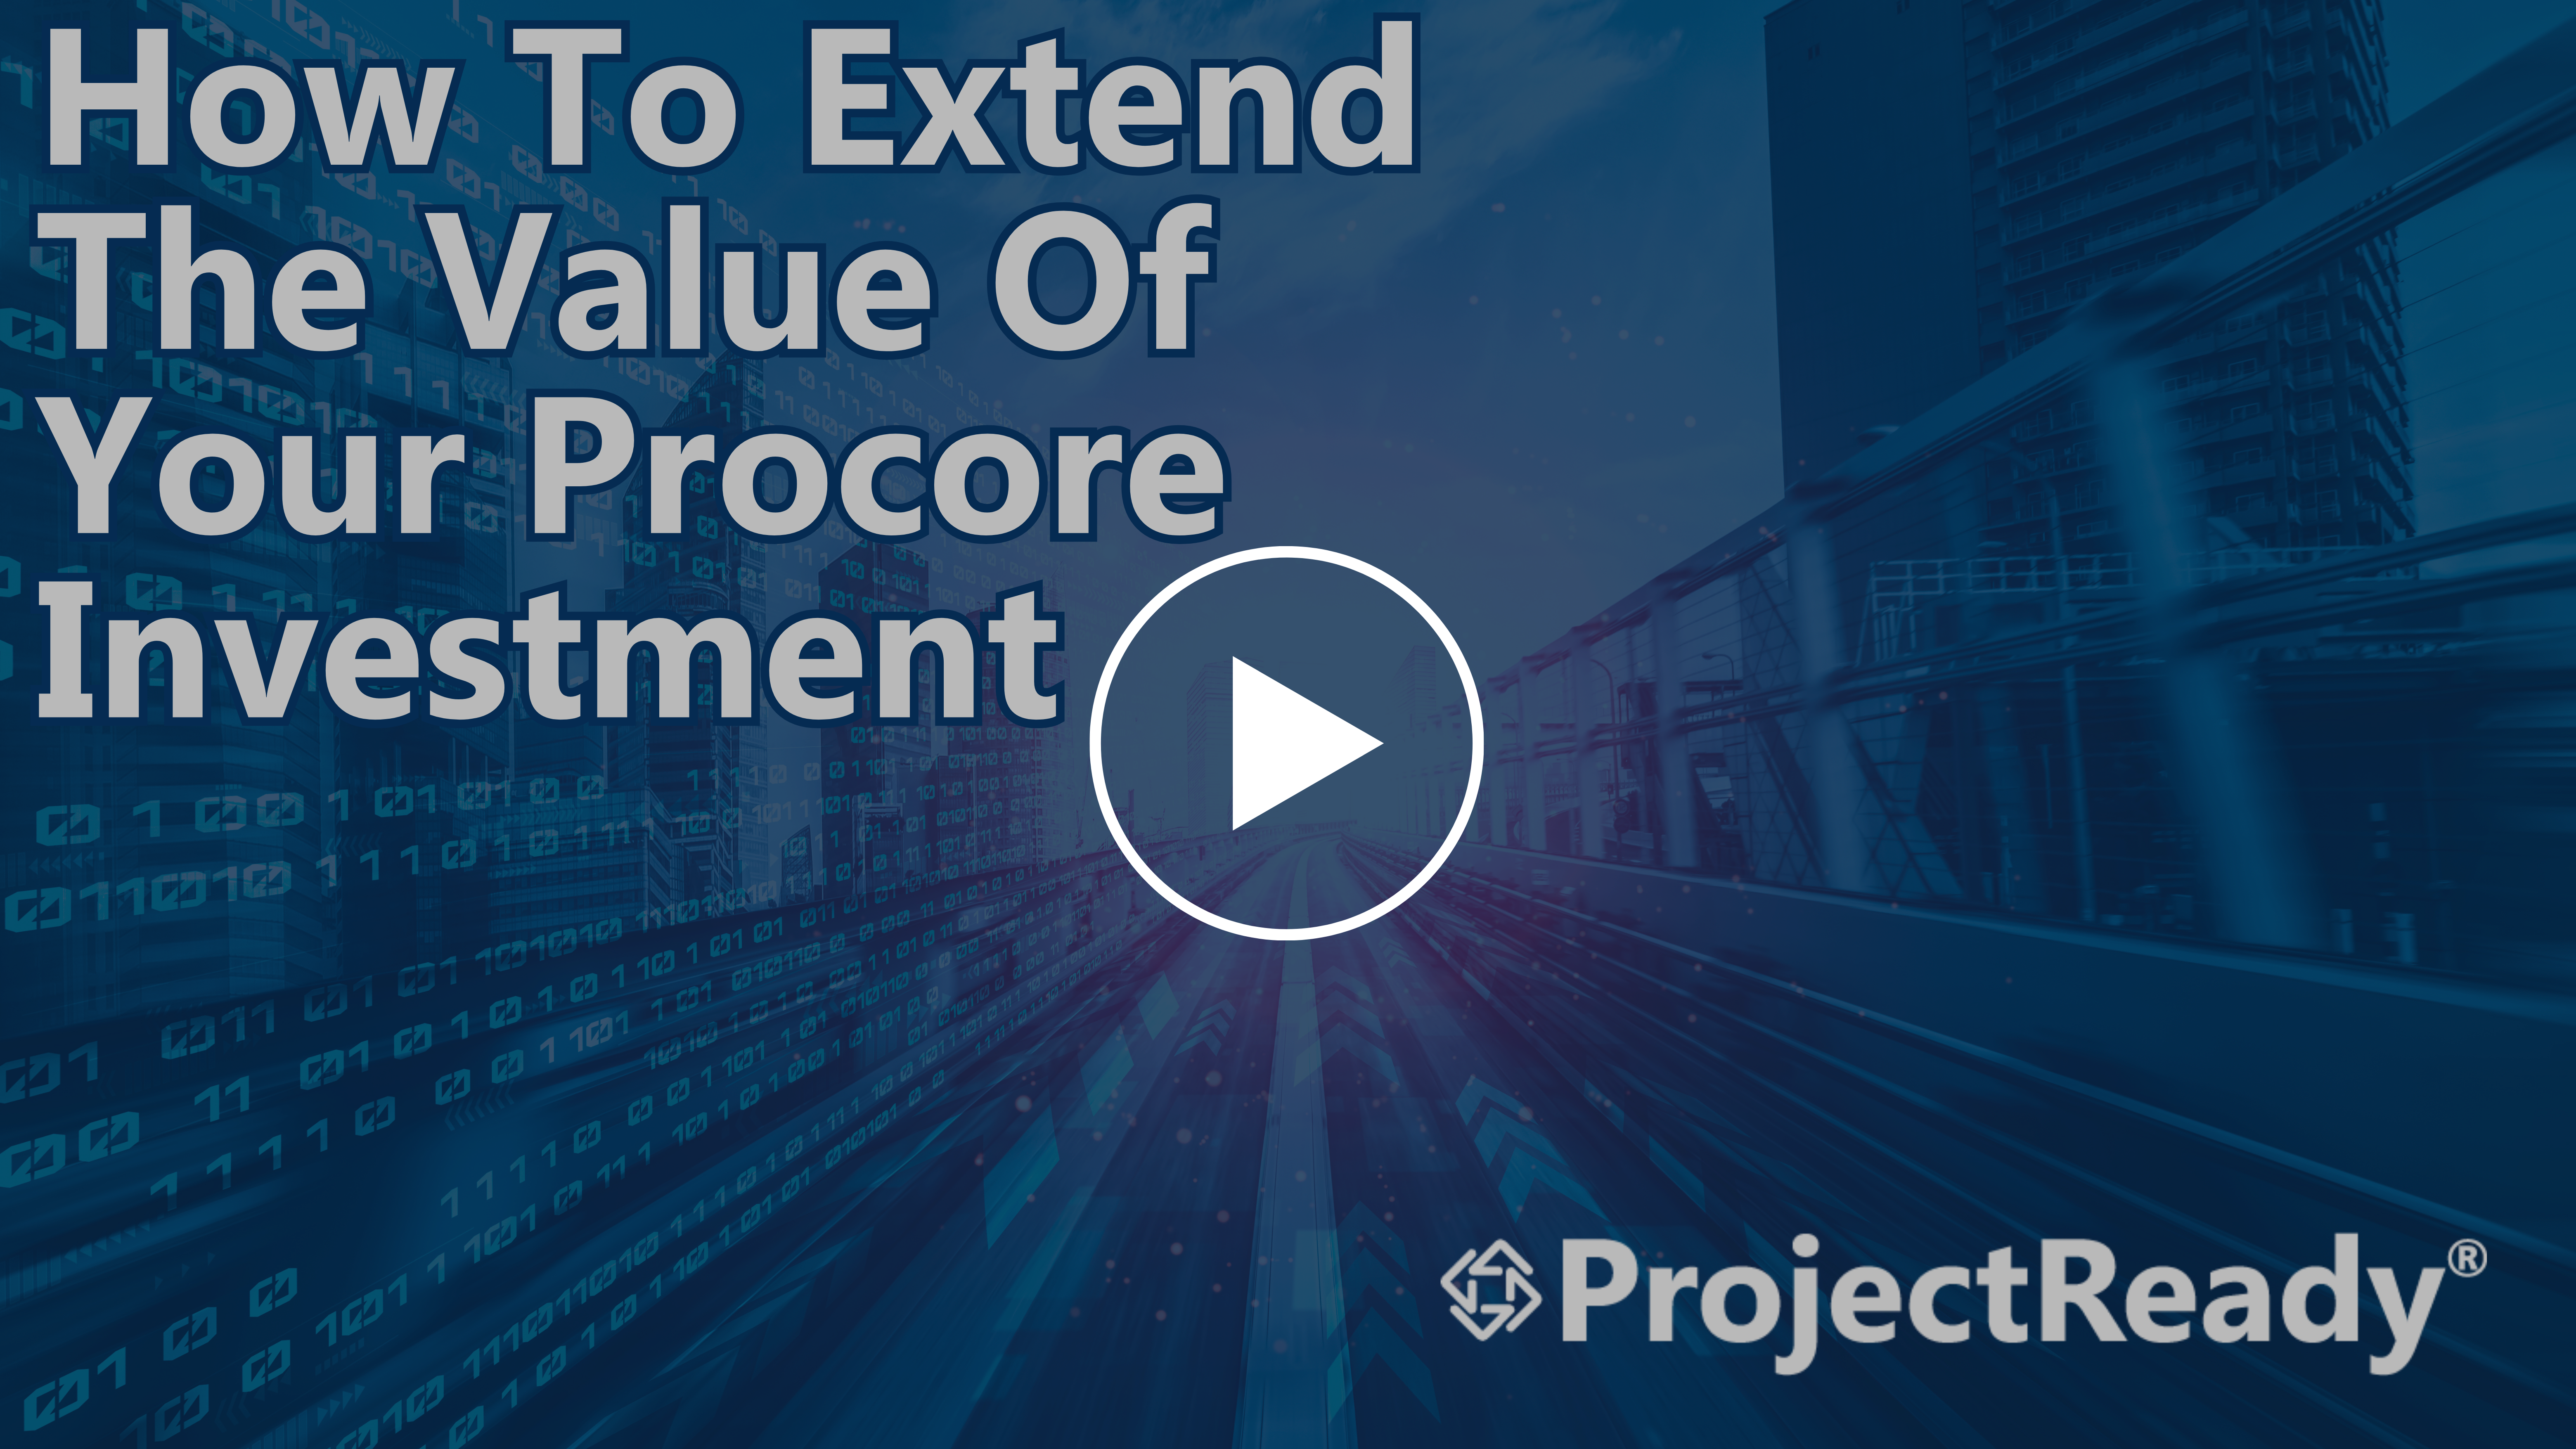 How To Extend The Value Of Your Procore Investment | Video Demonstration | ProjectReady | ProjectReady